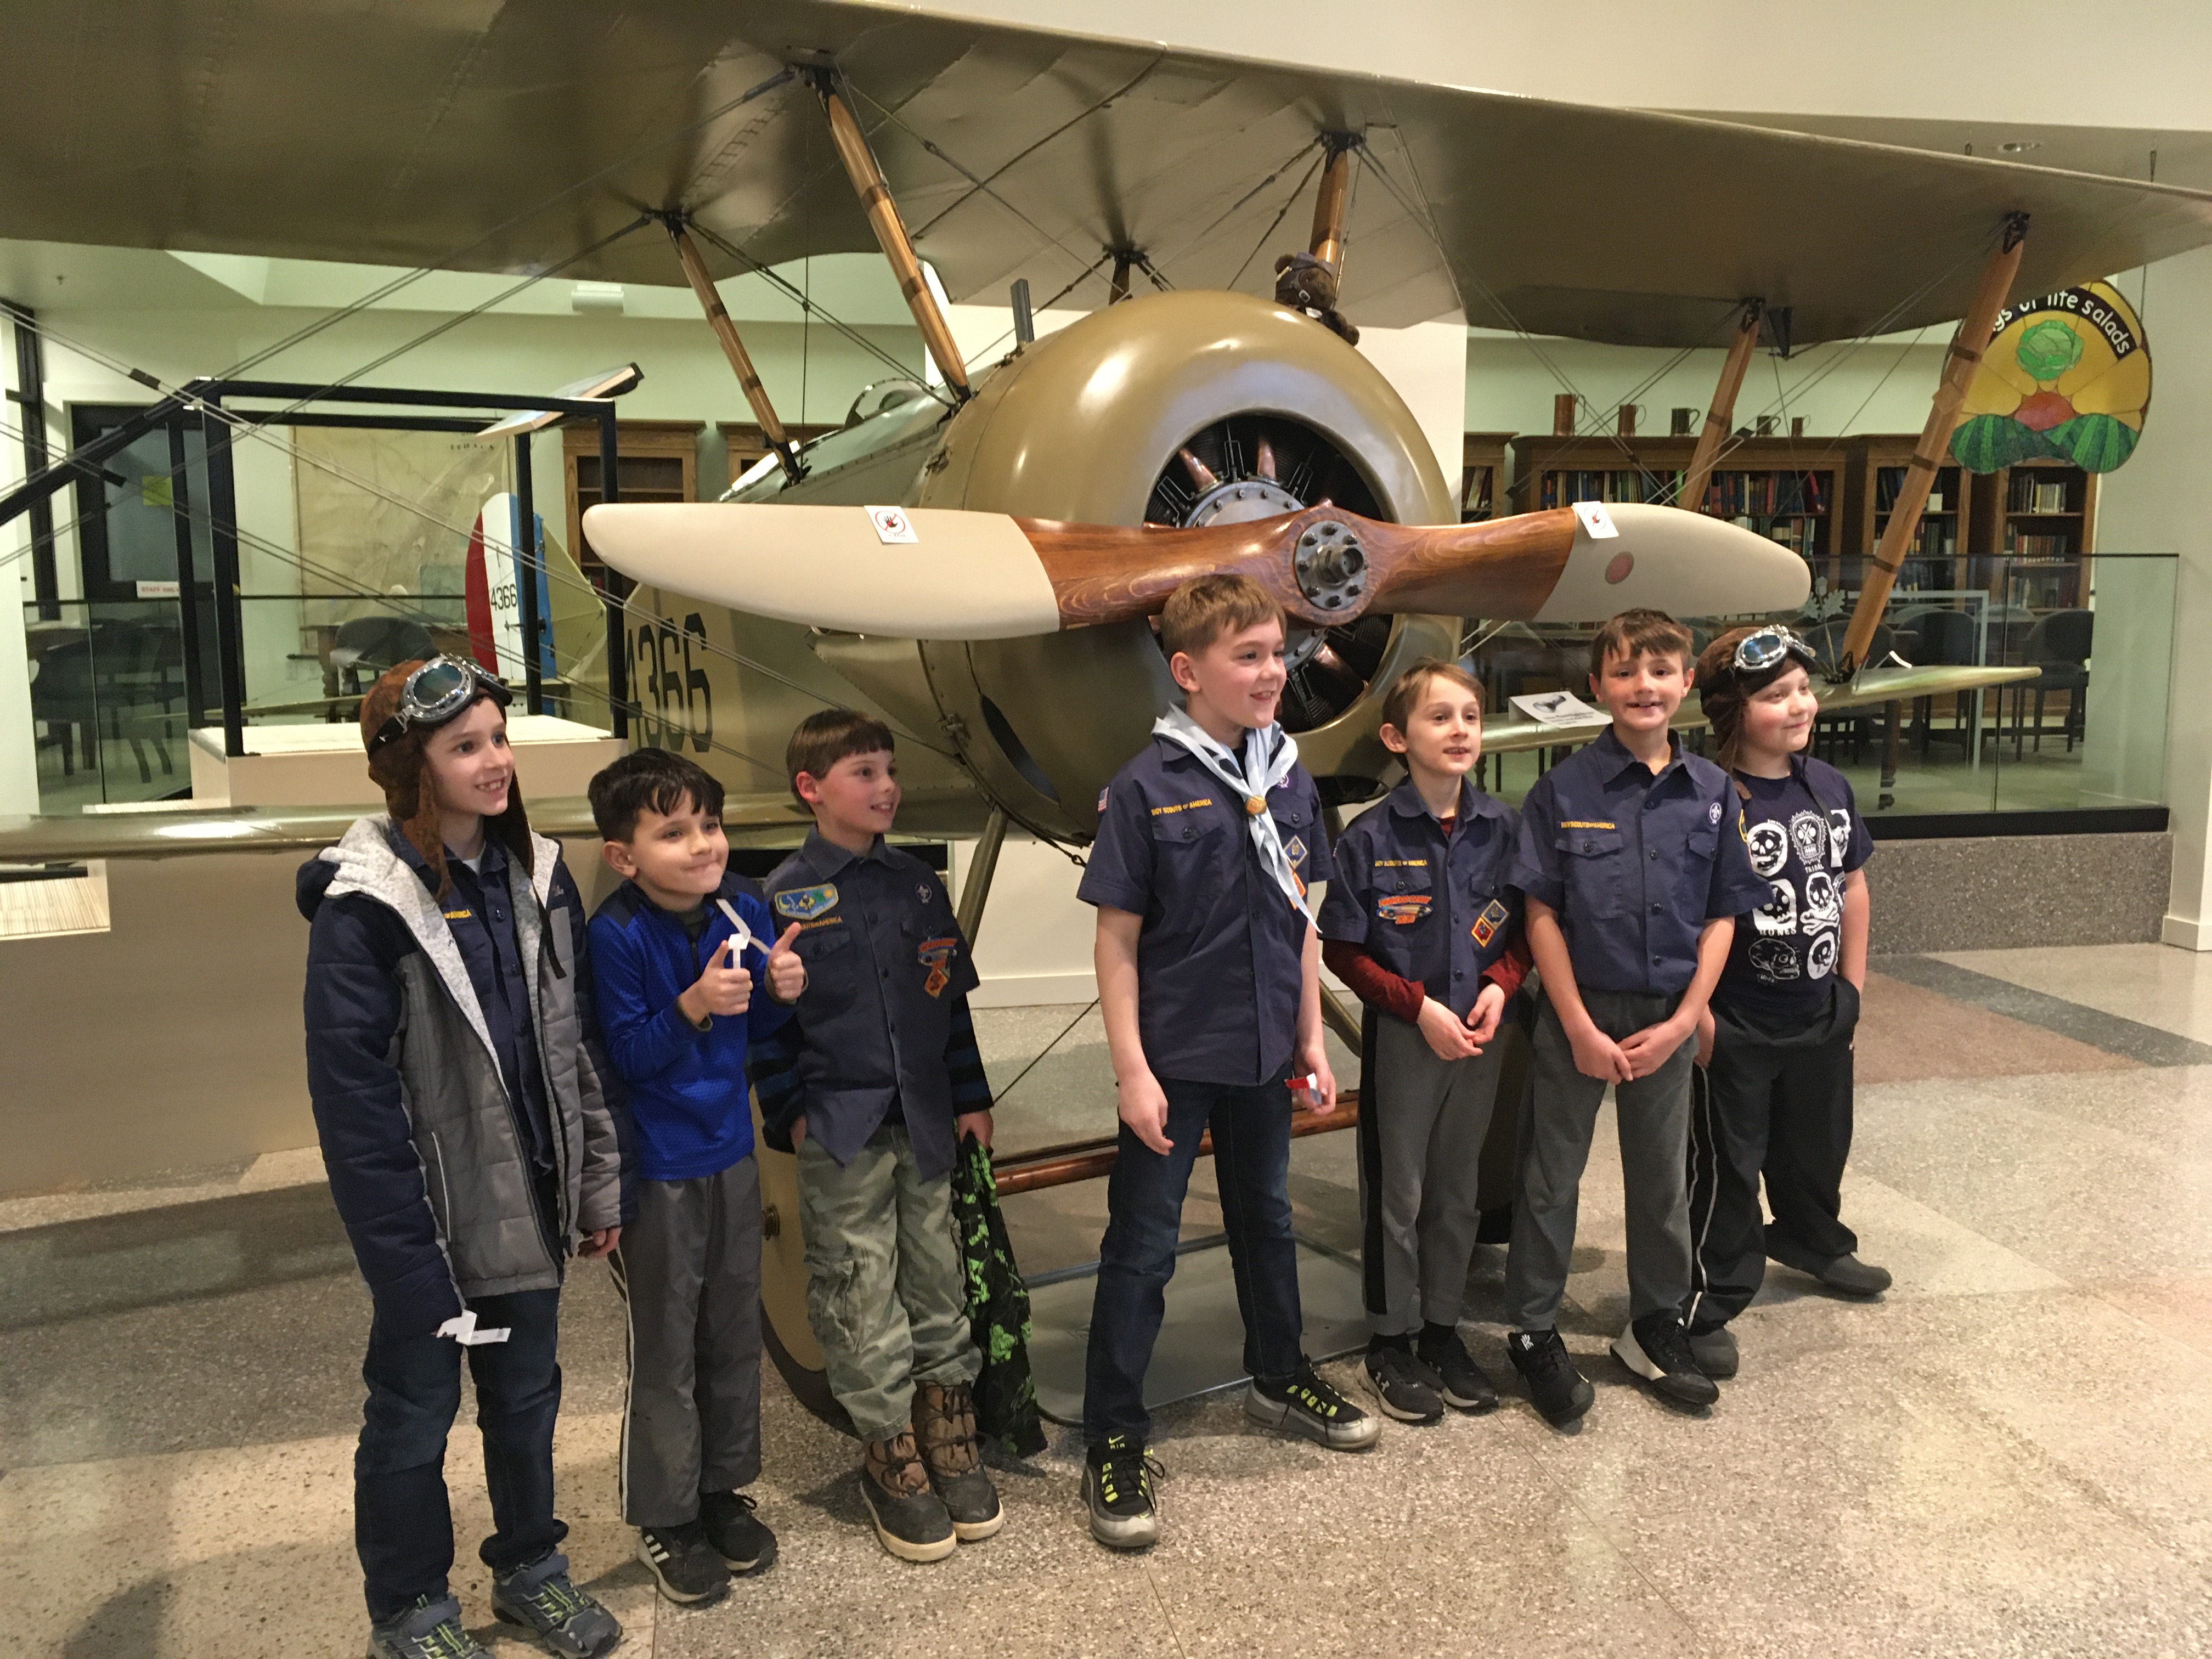 A photo of a group of students standing in front of the Tommy Plane.